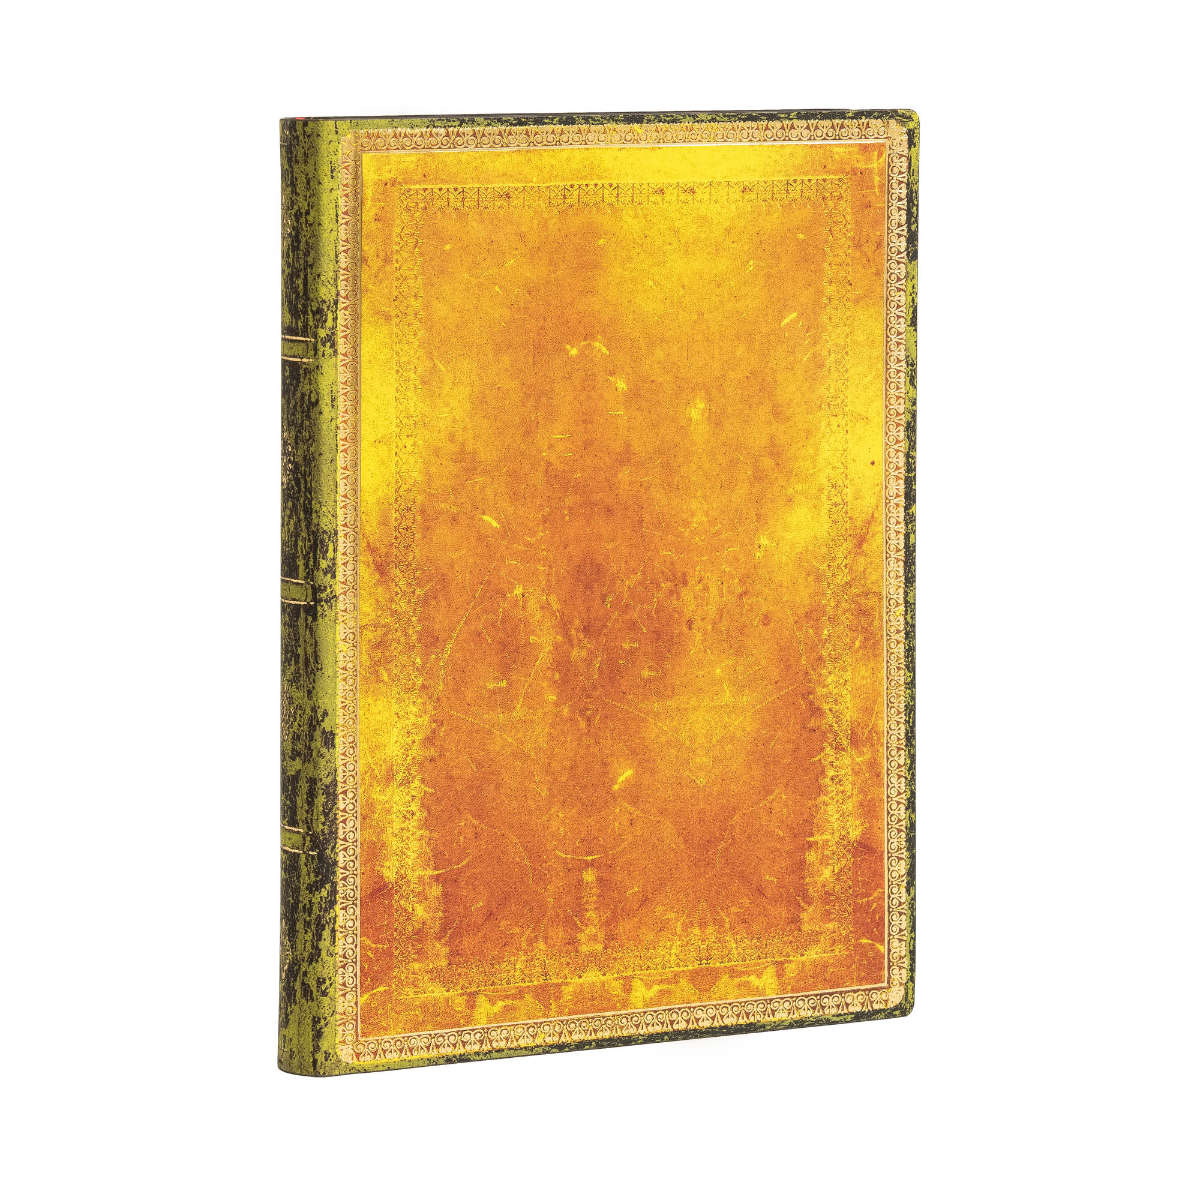 Paperblanks Flexis Old Leather Ochre Midi 5x7 Inch, 240 Lined